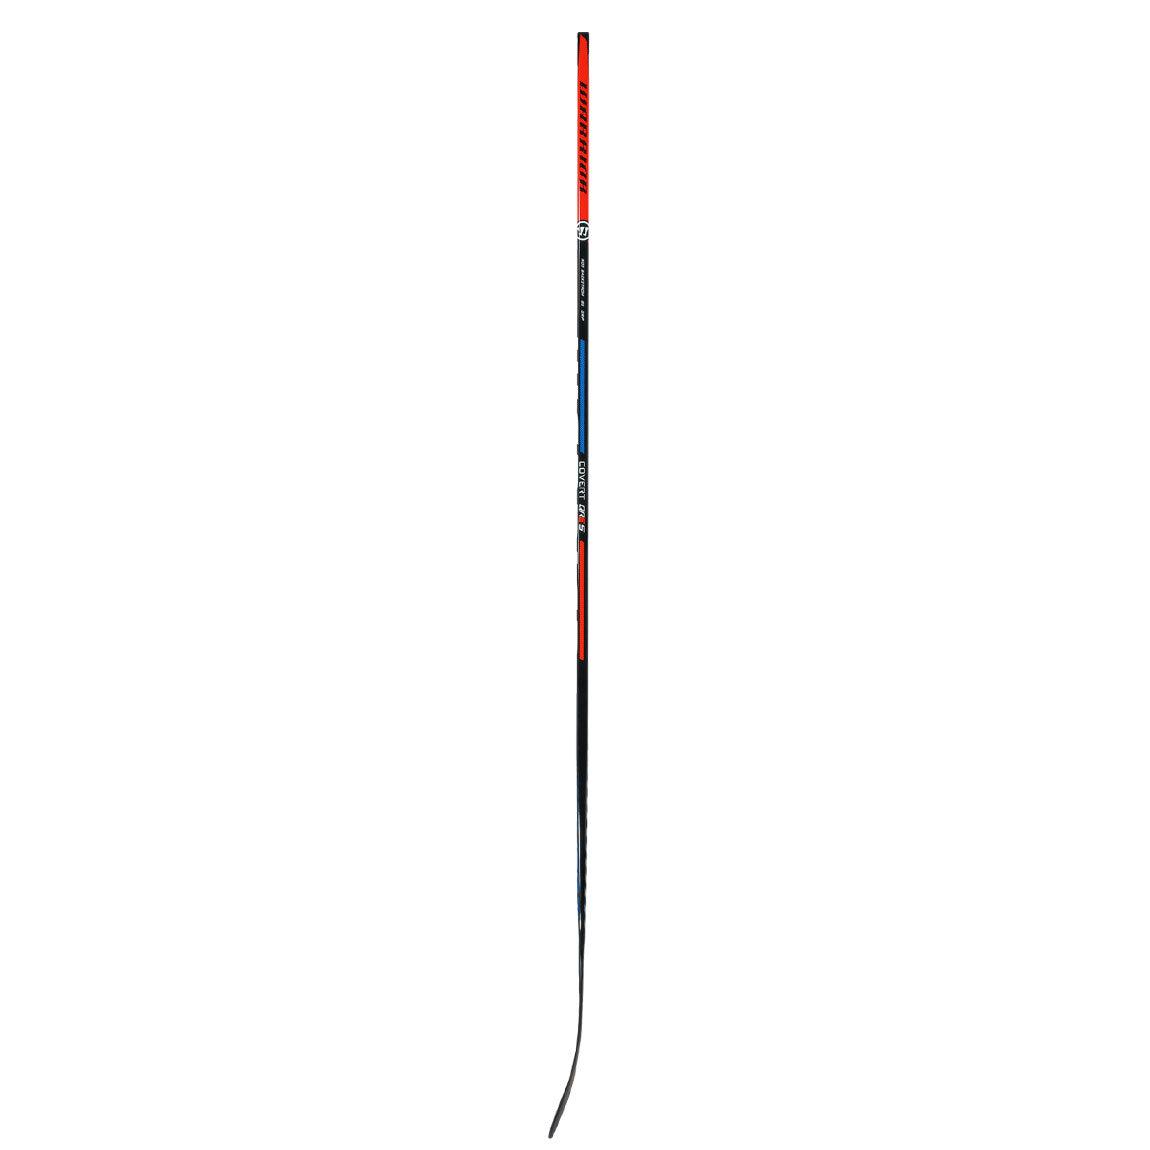 Covert QRE 5 Hockey Stick - Senior - Sports Excellence